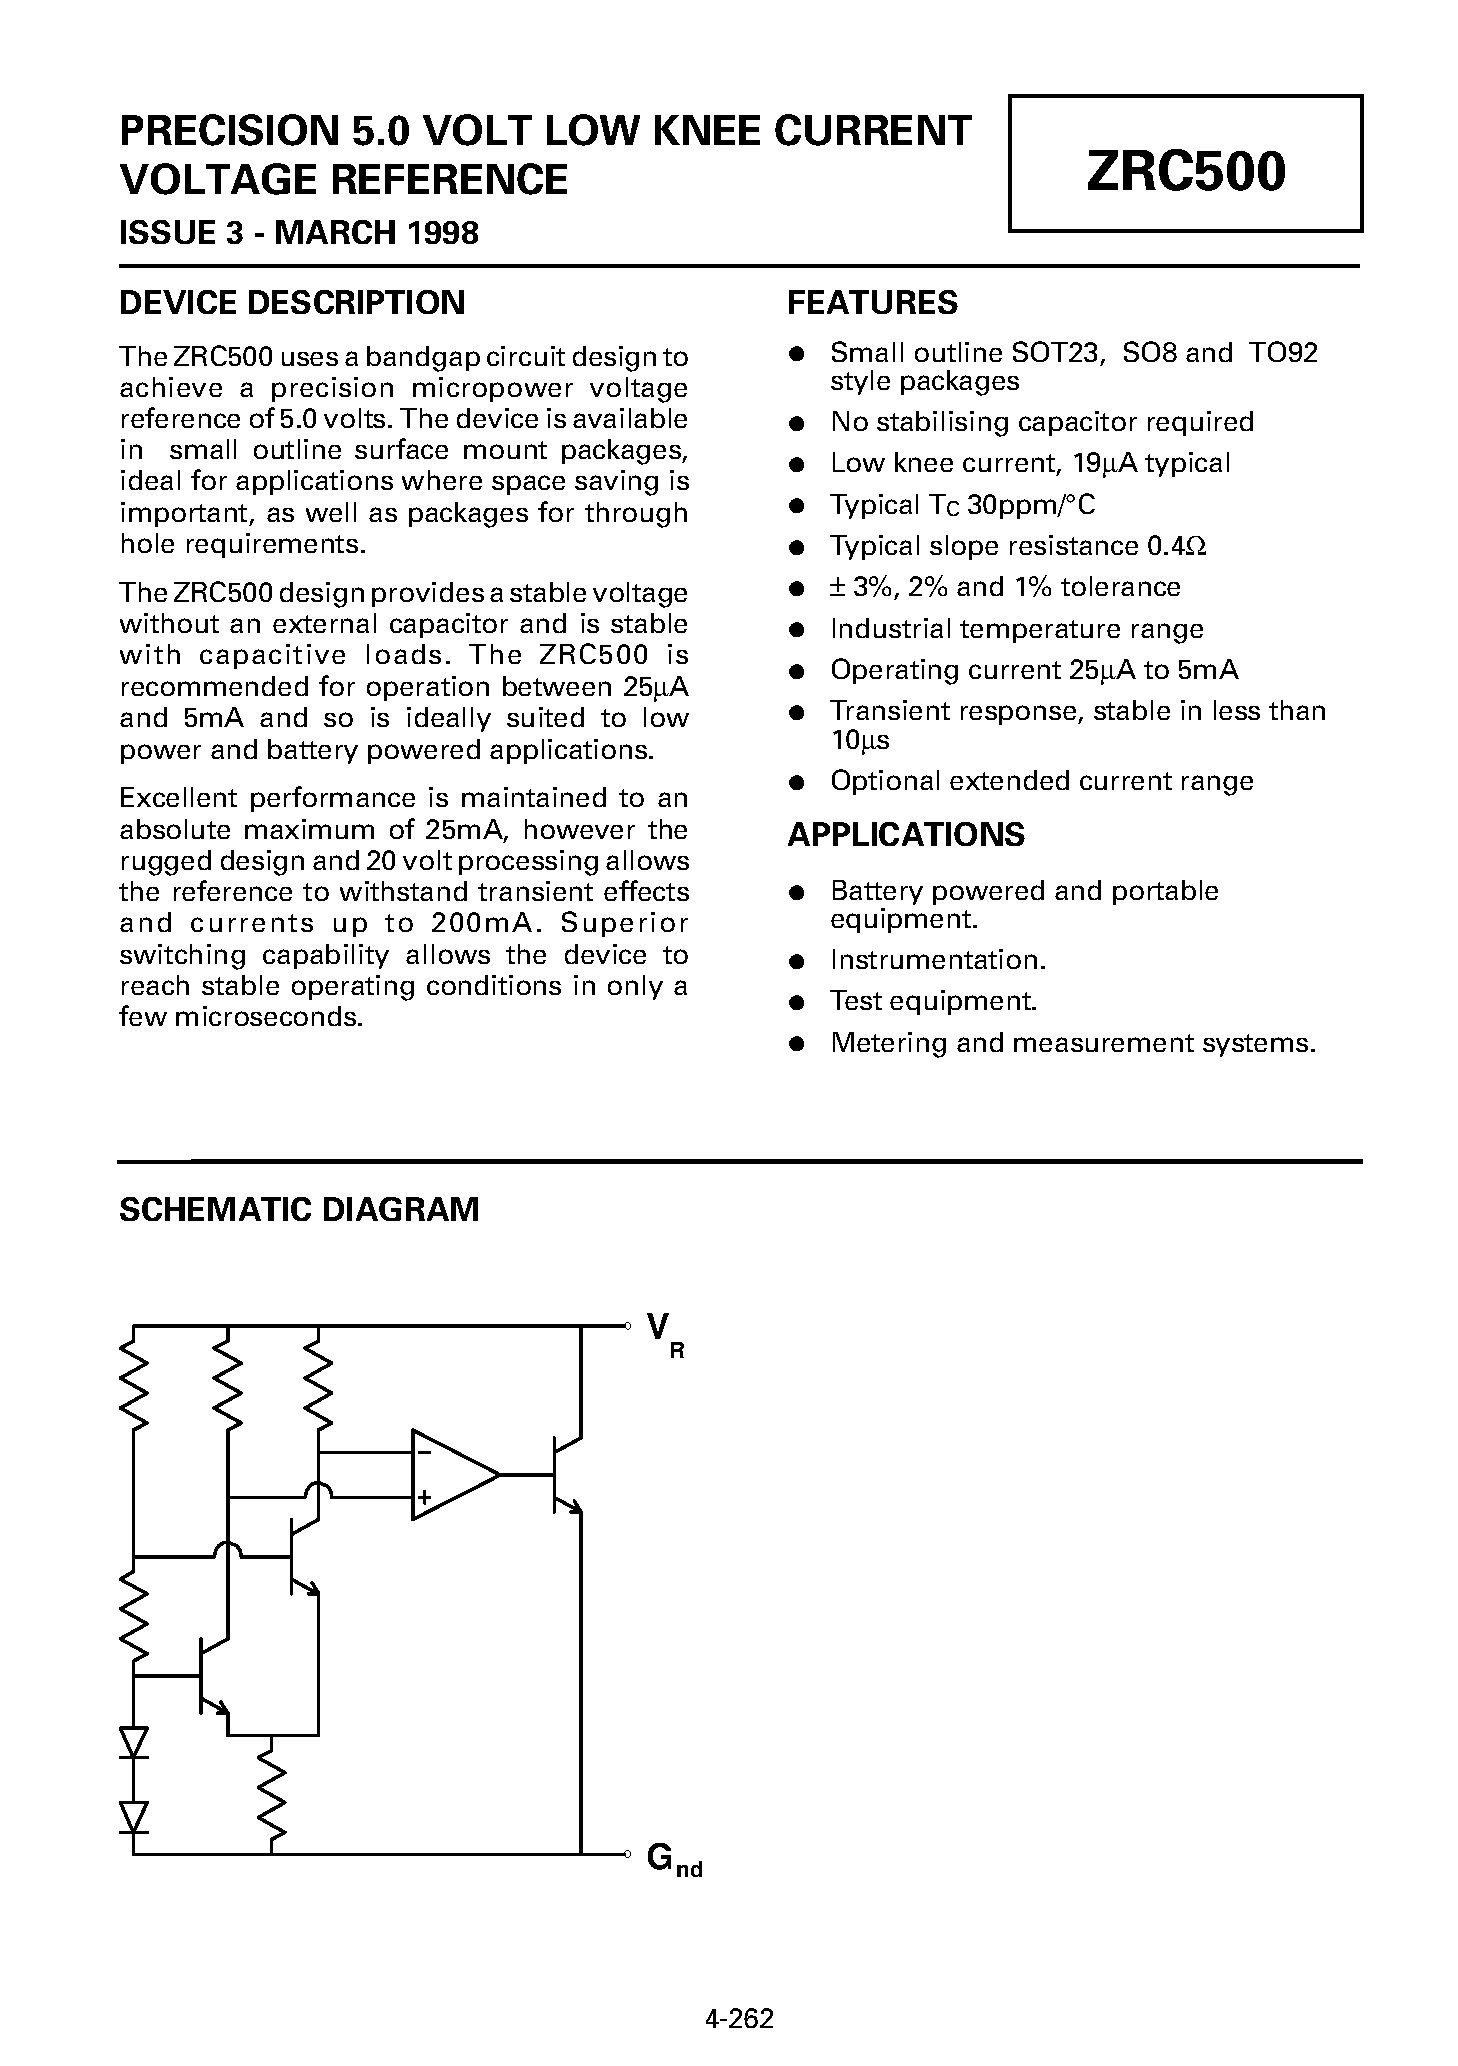 Datasheet ZRC500N801 - PRECISION 5.0 VOLT LOW KNEE CURRENT VOLTAGE REFERENCE page 1